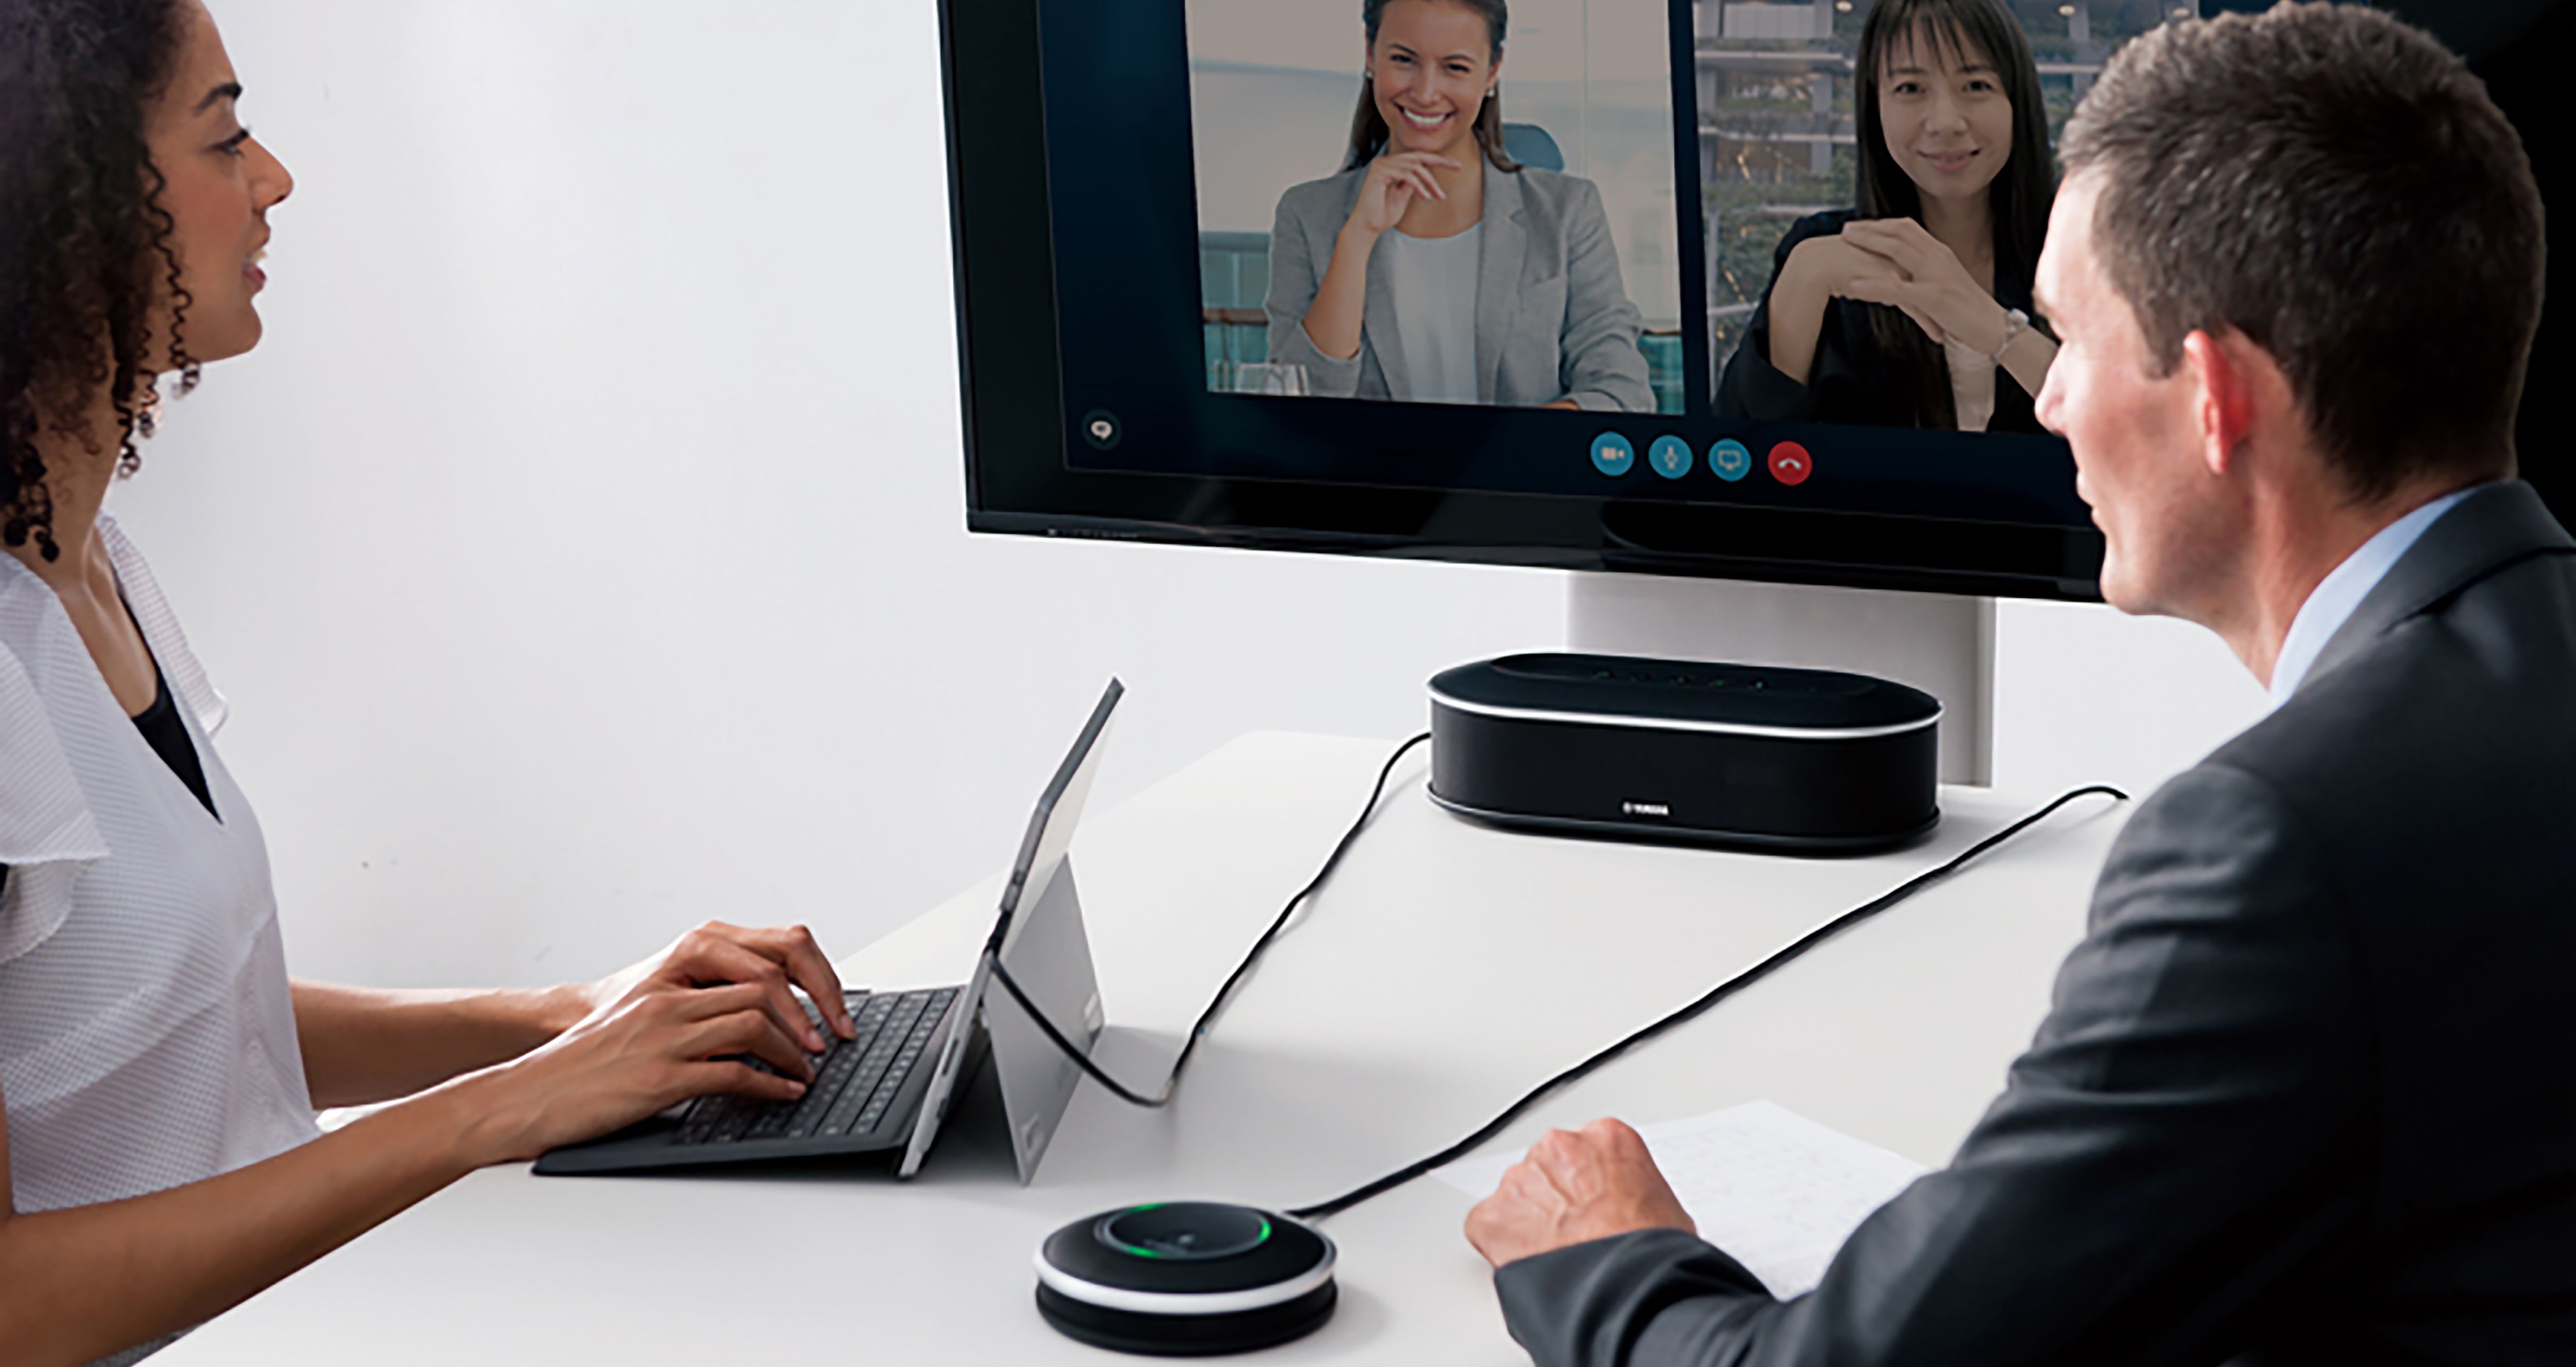 YVC-1000 - Features - Speakerphones - Unified Communications 